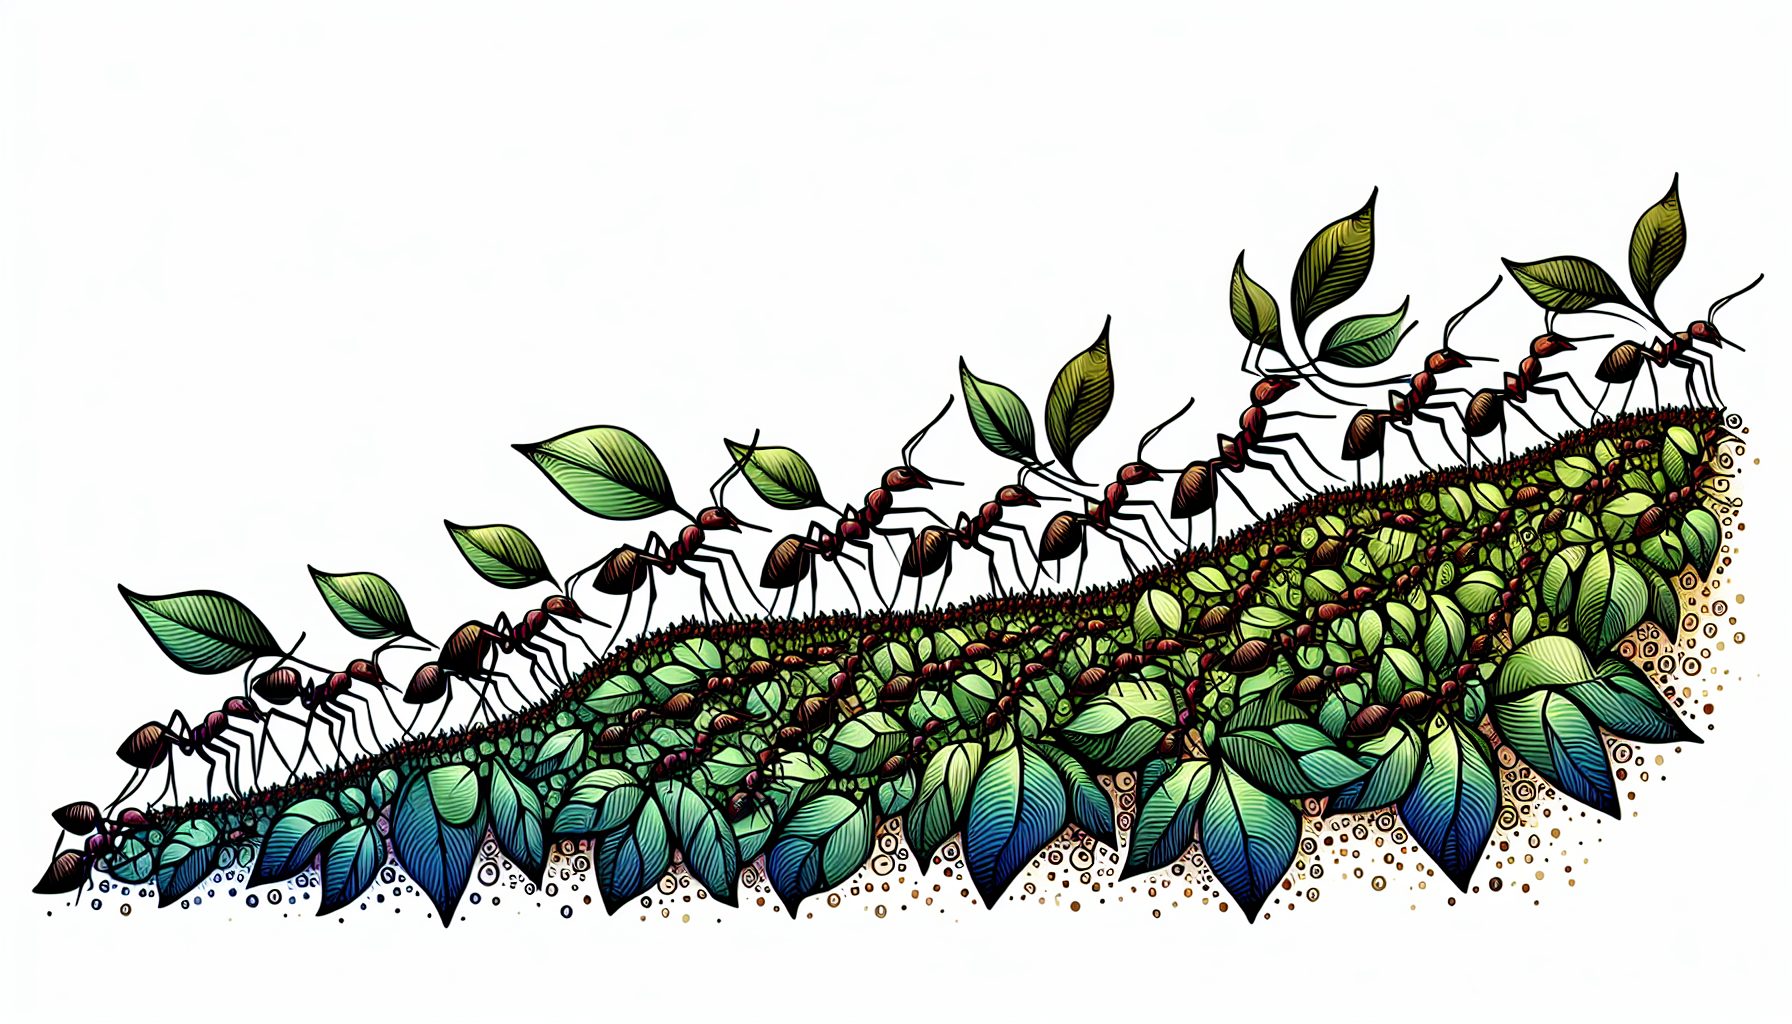 Ants Marching